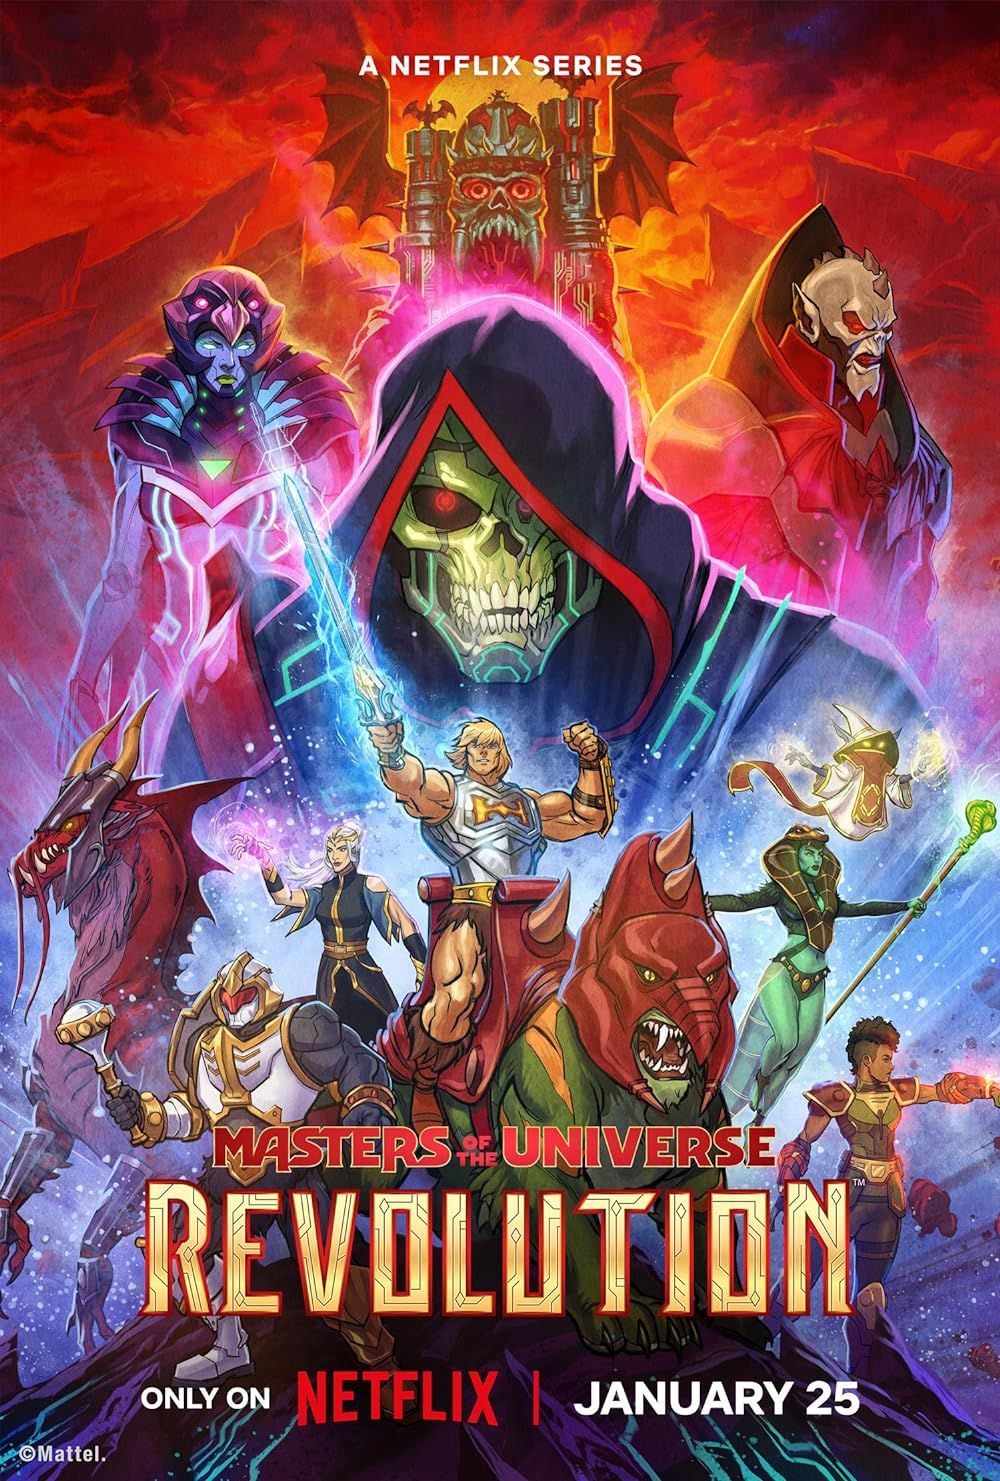 Will She-Ra Fans Enjoy Masters of the Universe: Revelation?